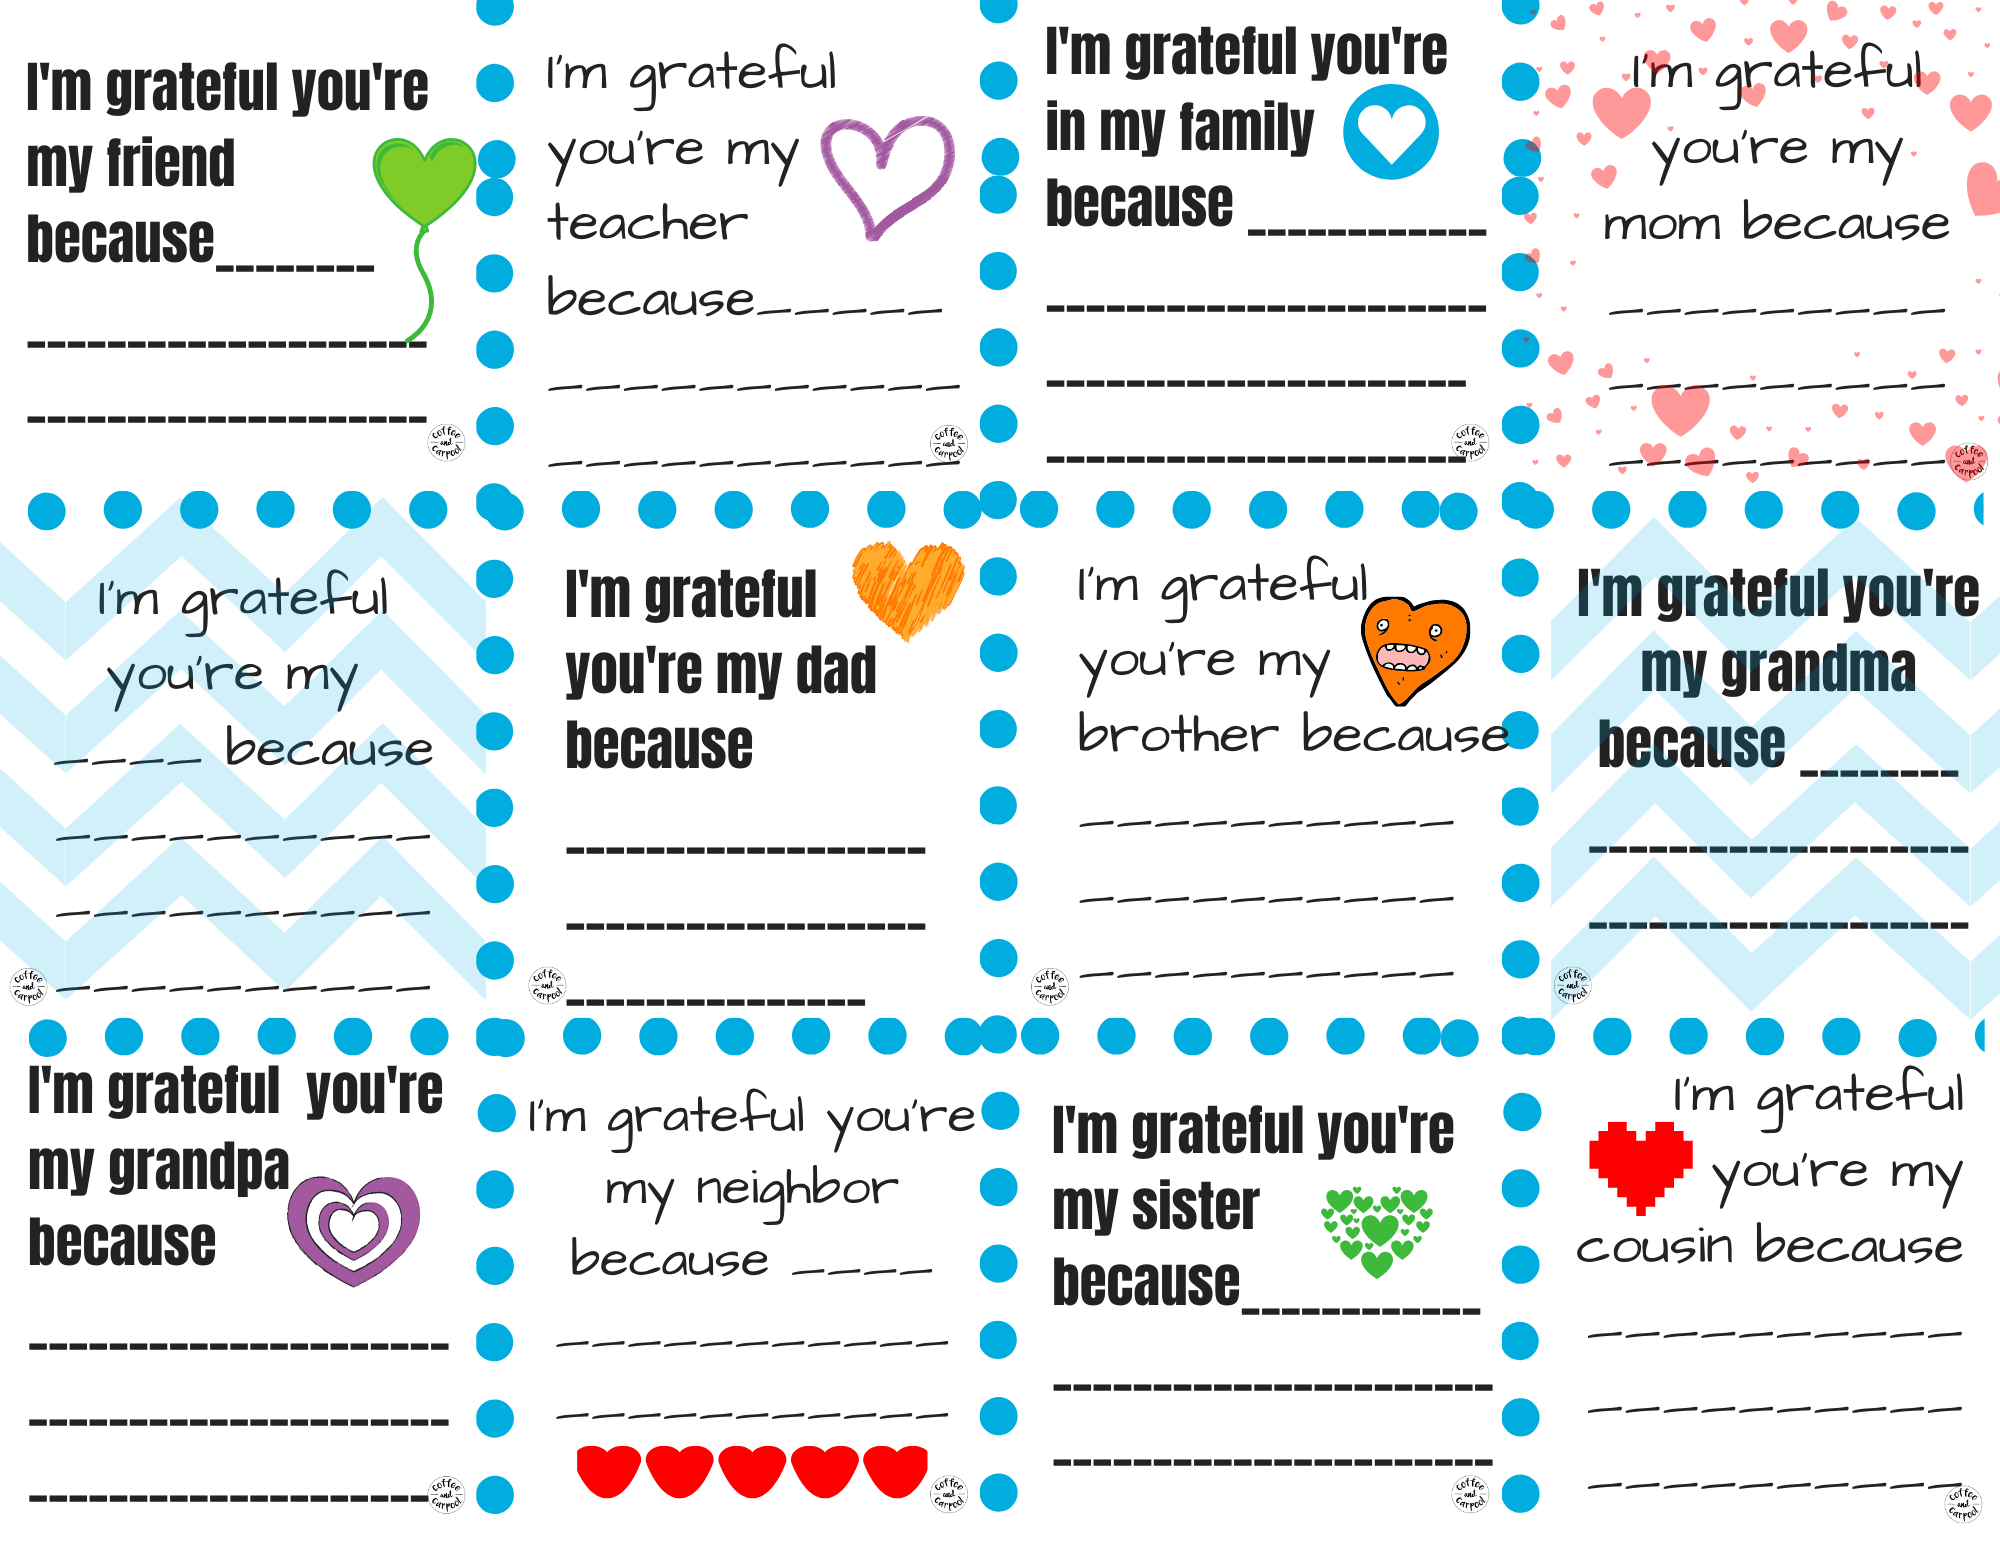 Gratitude notes to help kids tell the people in their lives they appreciate them. It's a great kindness activity for kids. #gratitude #kindnessactivitiesforkids #appreciation #gratitudeactivities